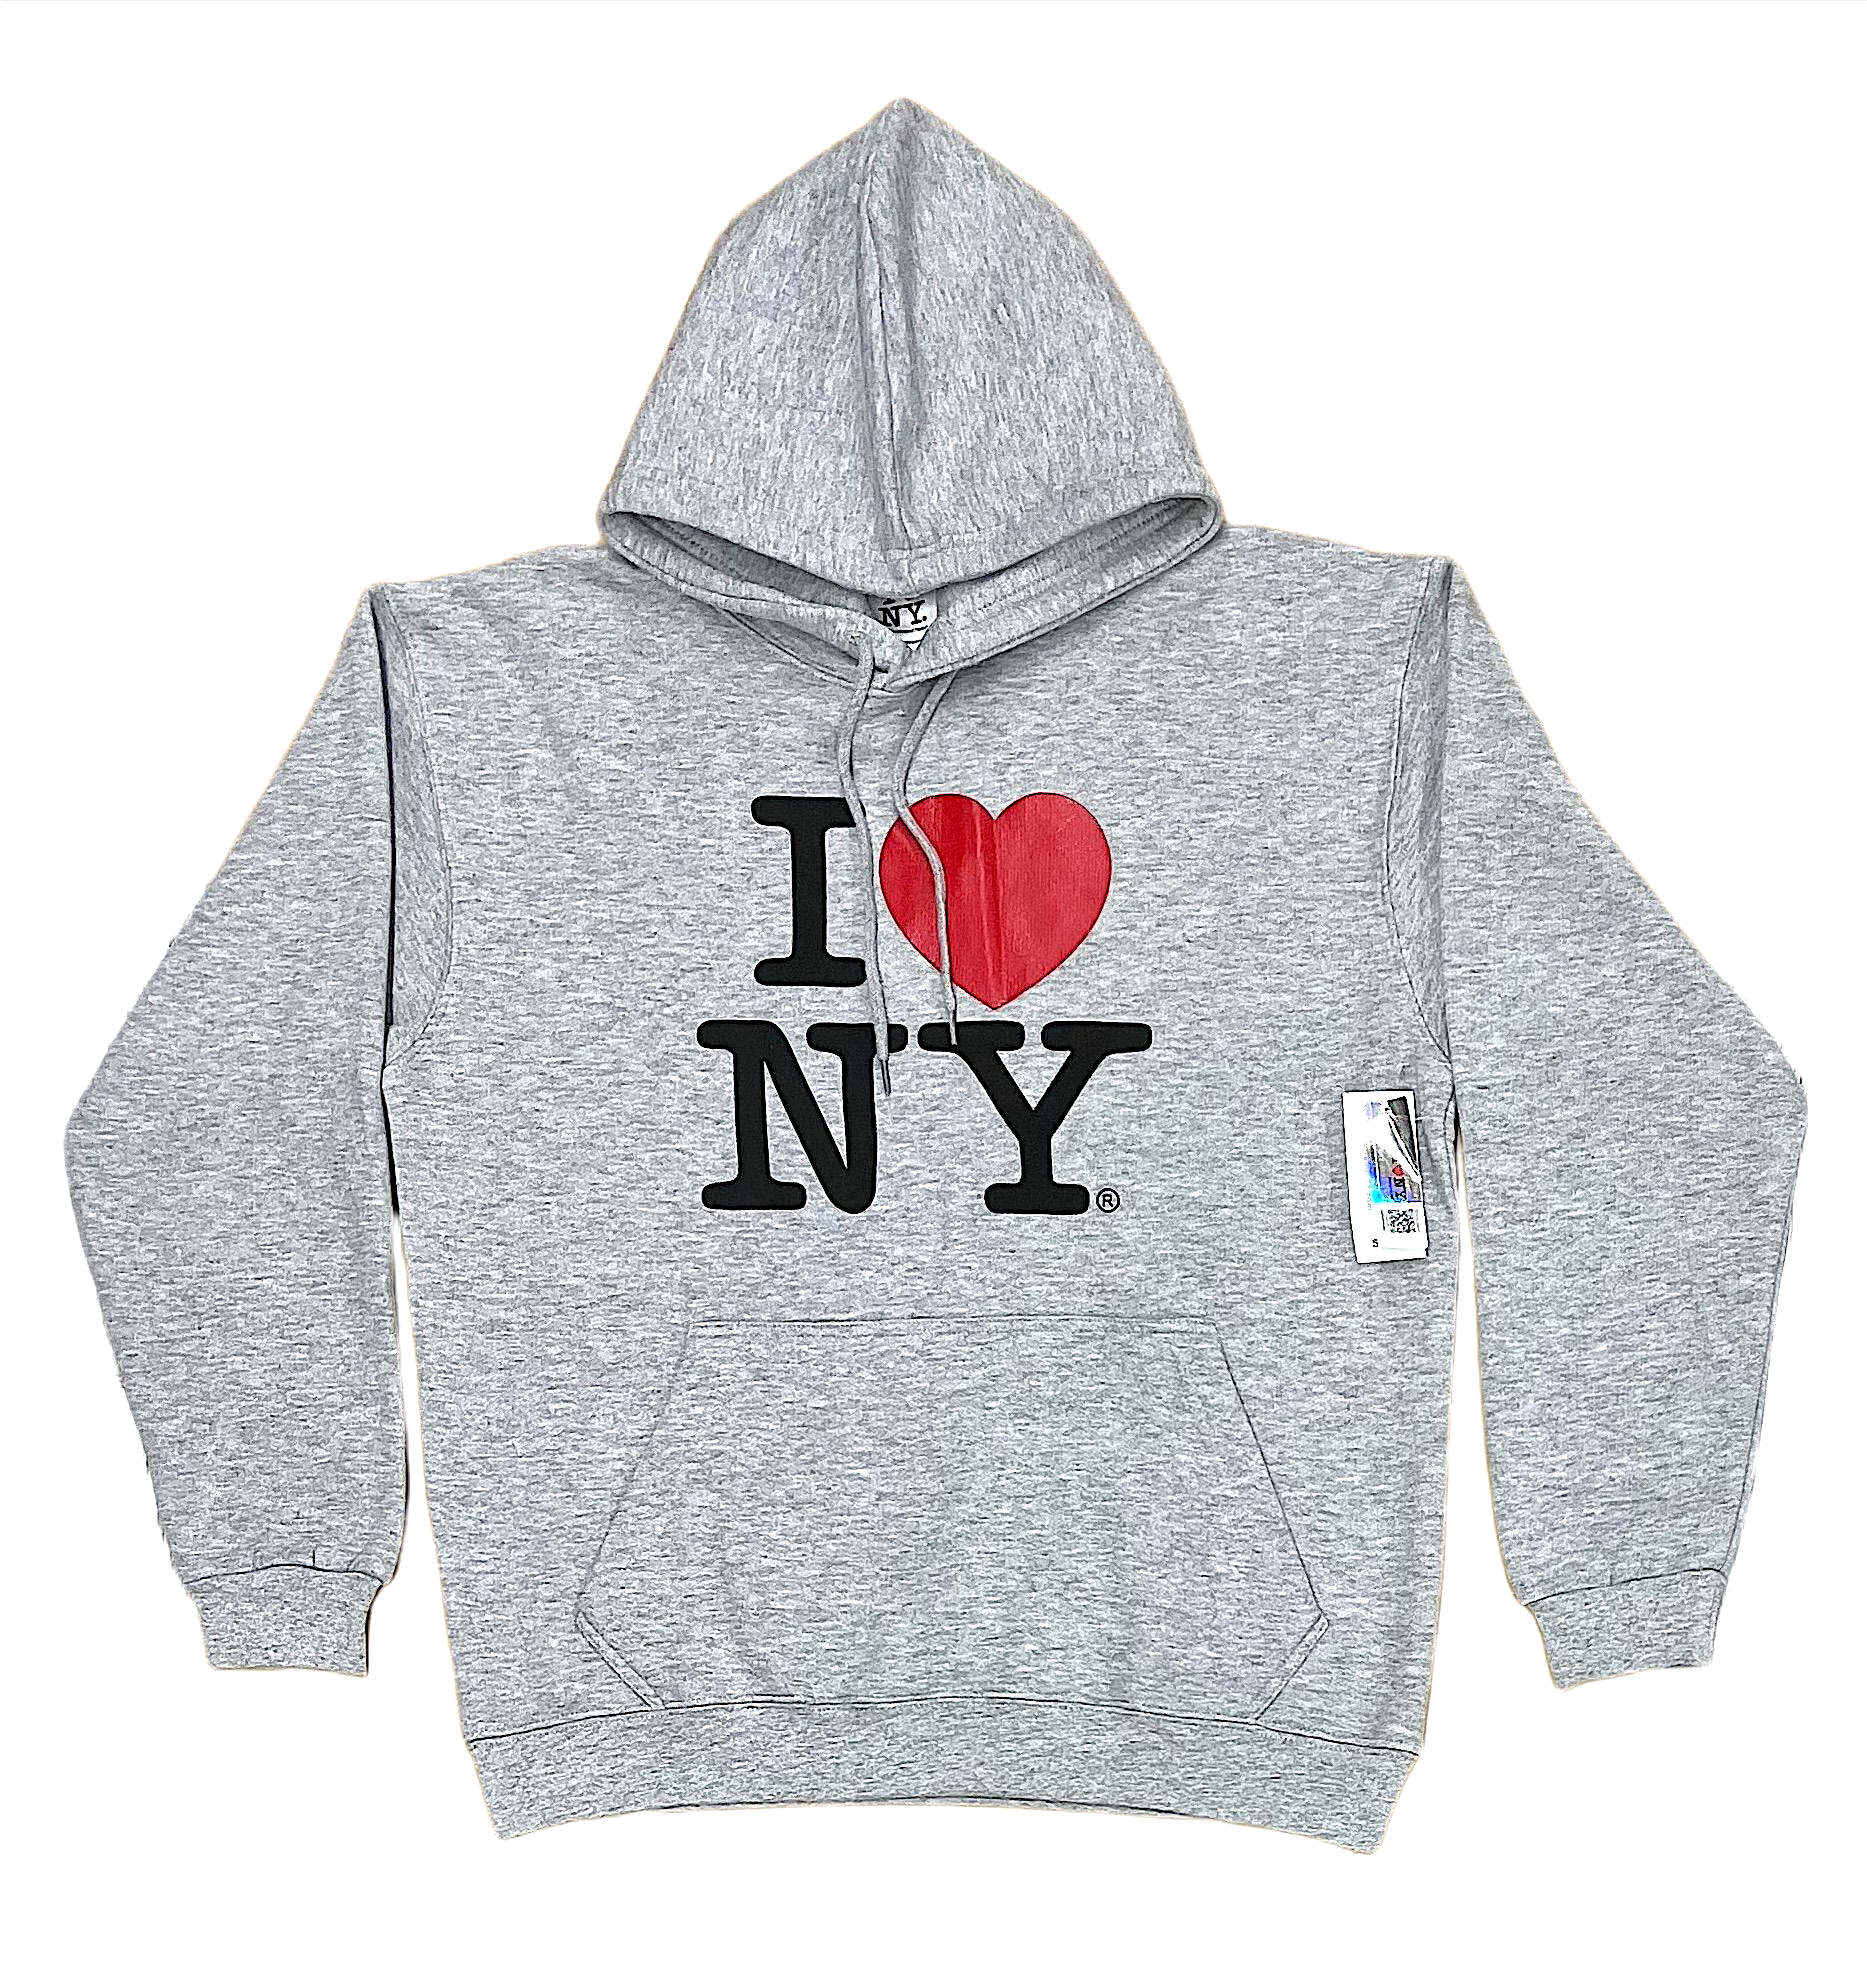 Adult Pullover Hoodies With NEW YORK EST.1664 Screen Print – WALI USA INC